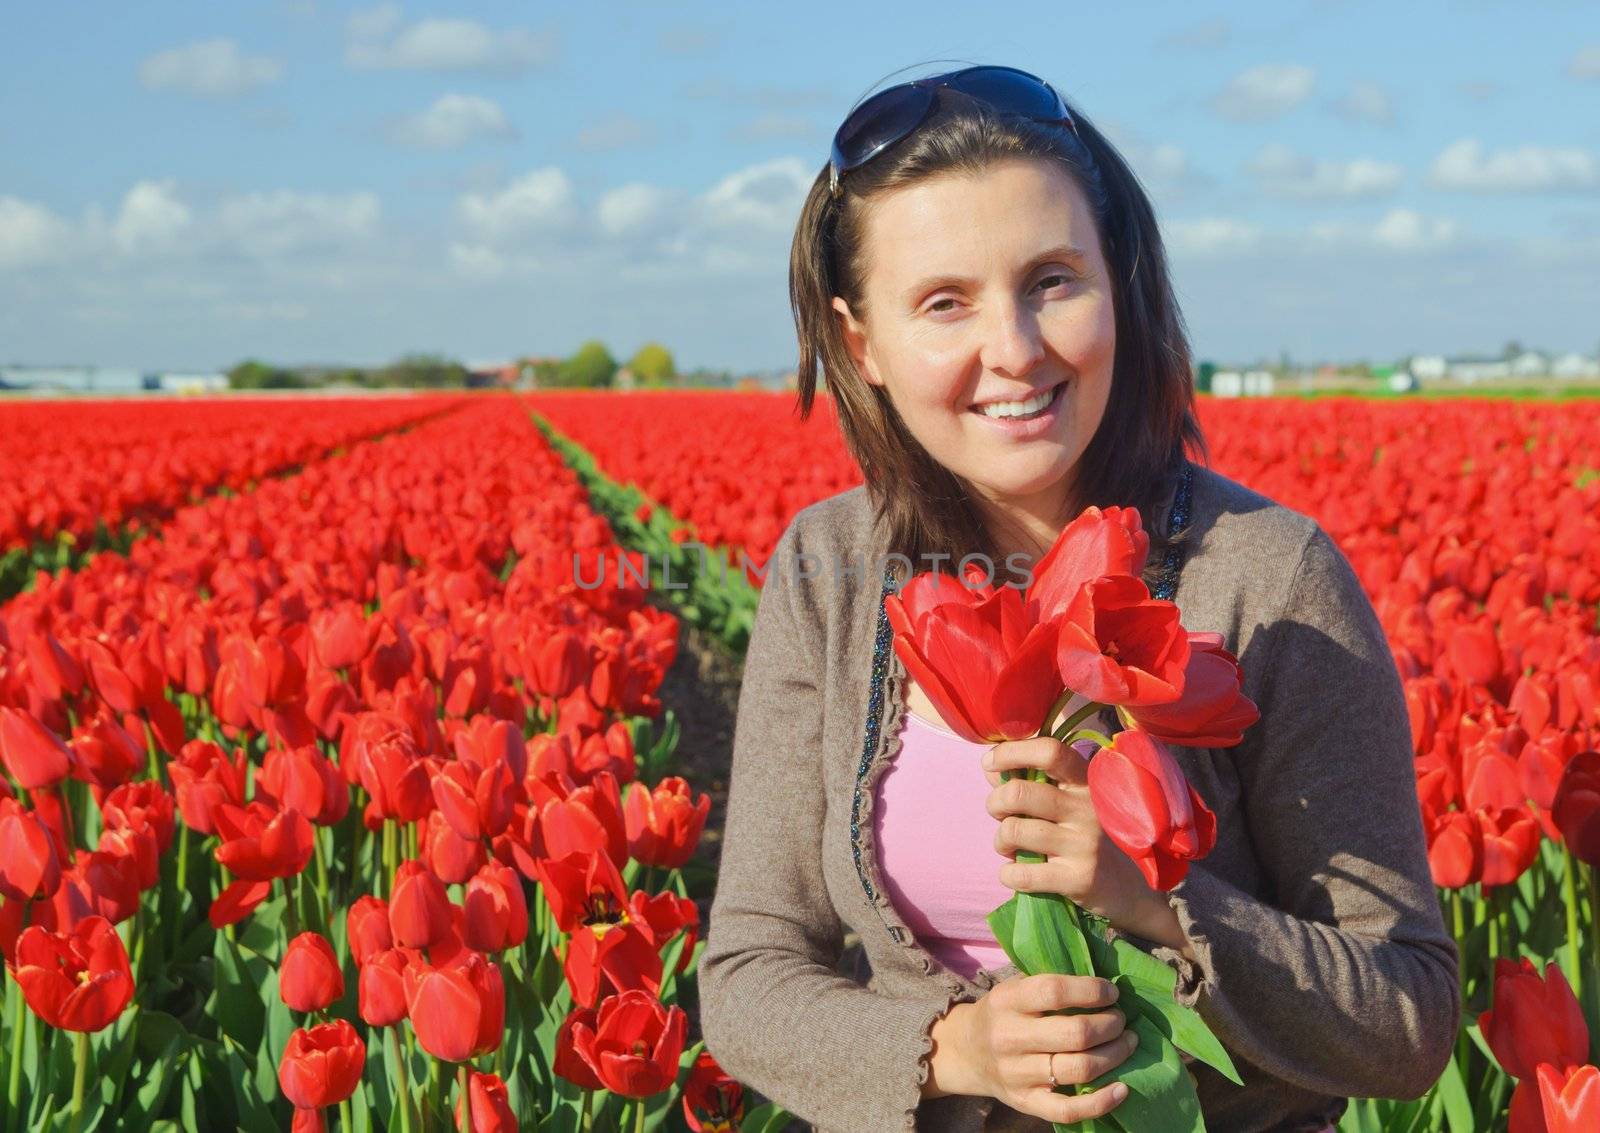 Happy women with red tulip in tulips field.